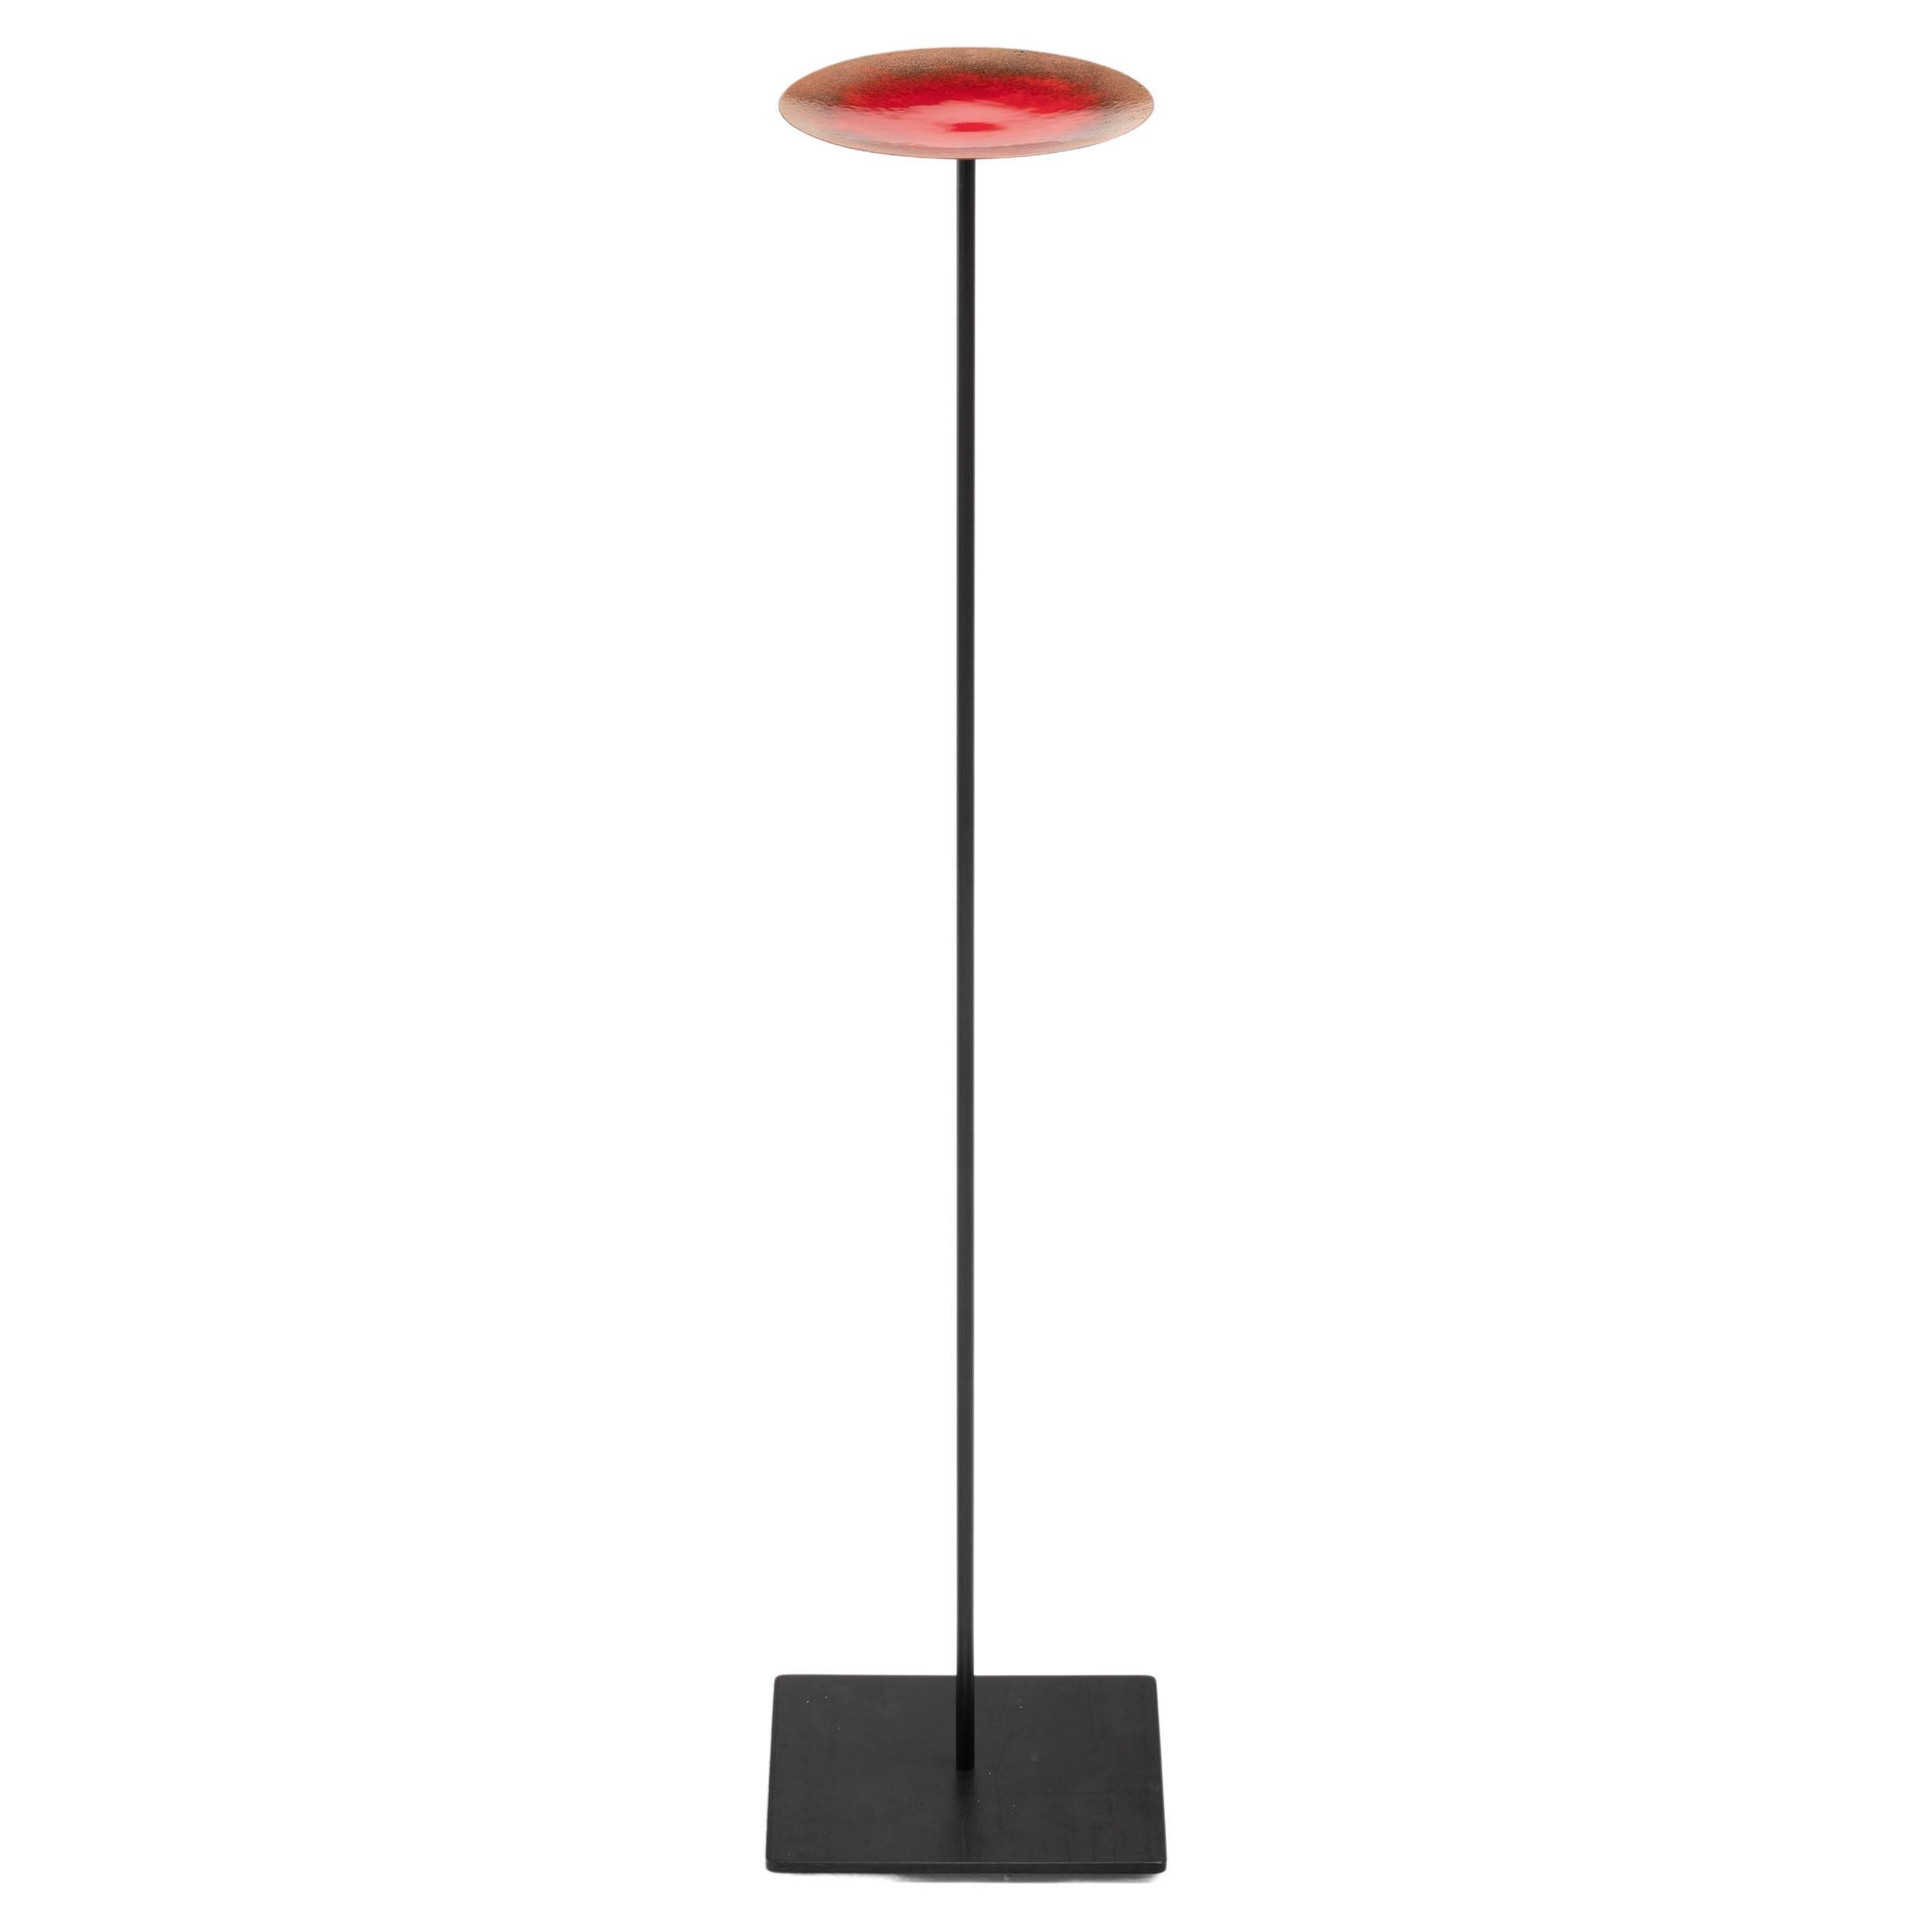 Specola, Dish on Floor Stand, Fire Enamel on Copper For Sale 1